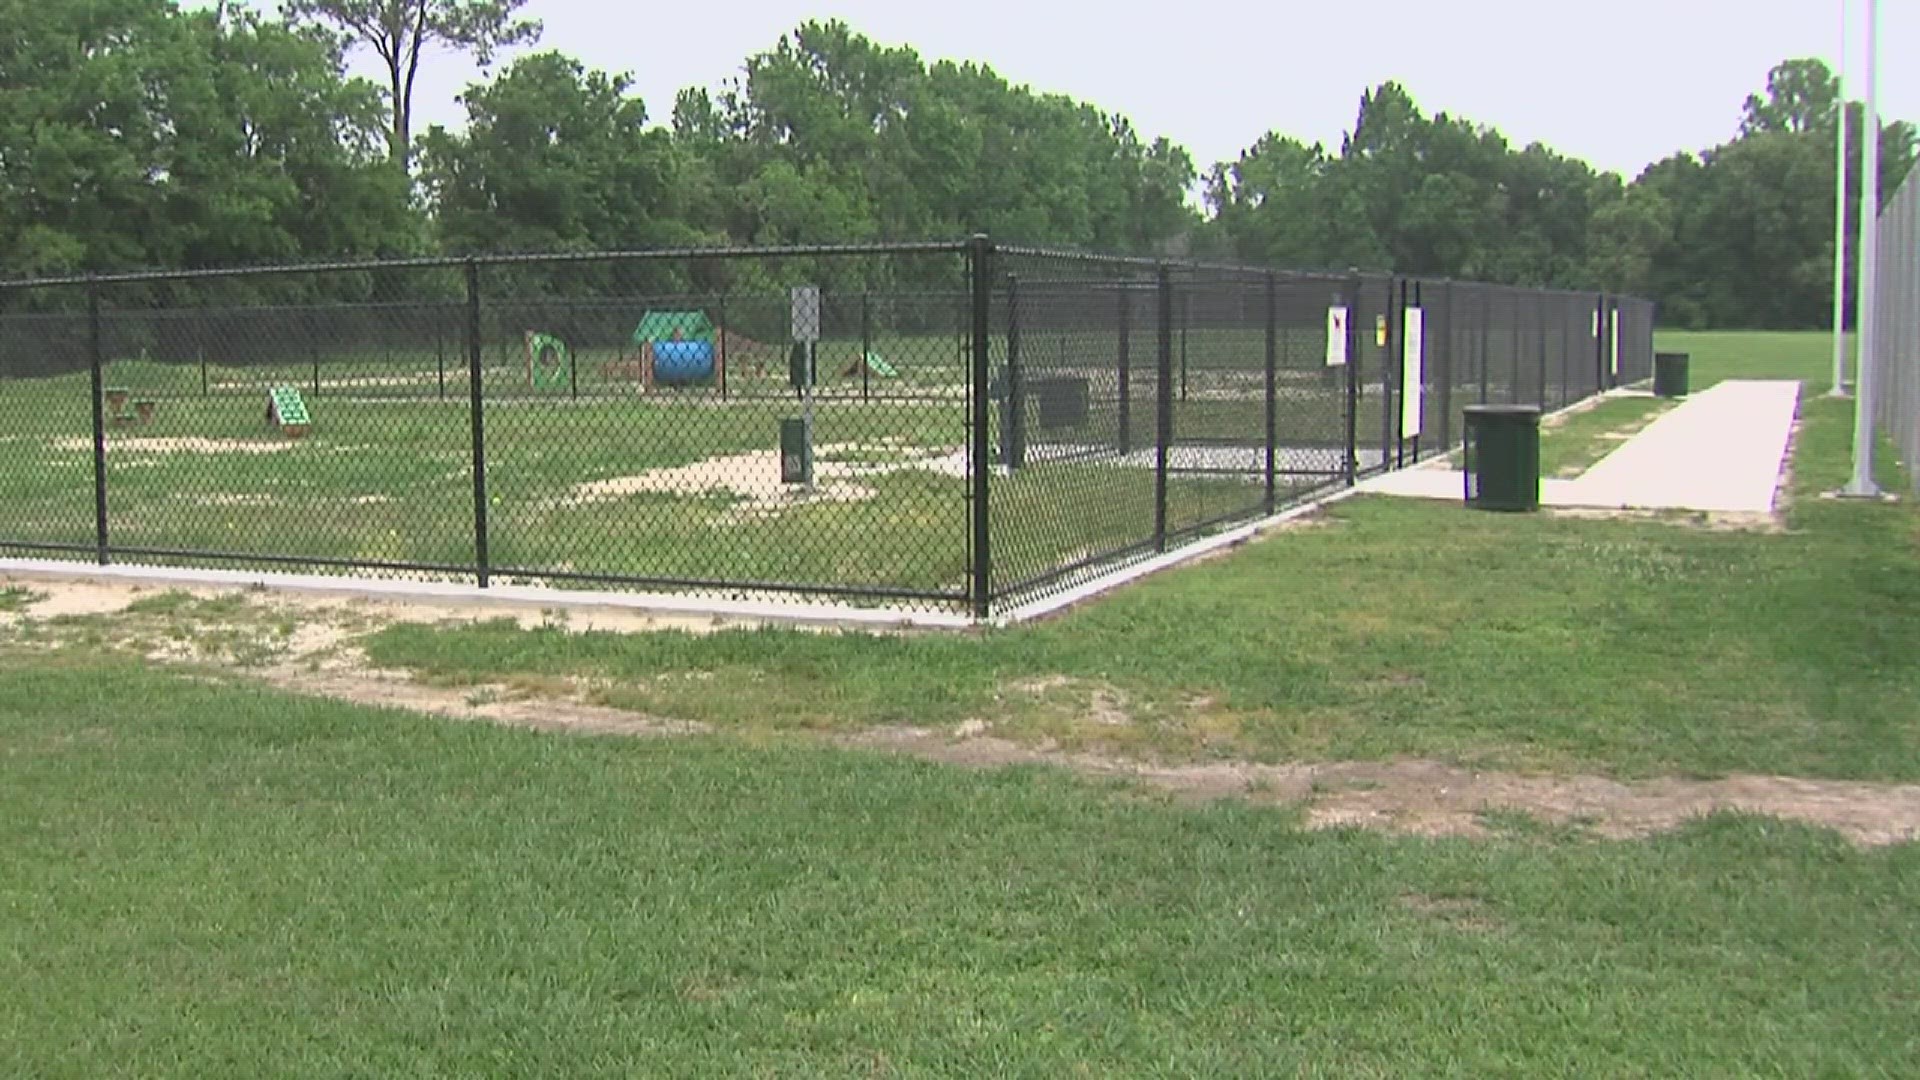 The grass for the dog park has been delayed until May, pushing the opening date to early to mid-July.